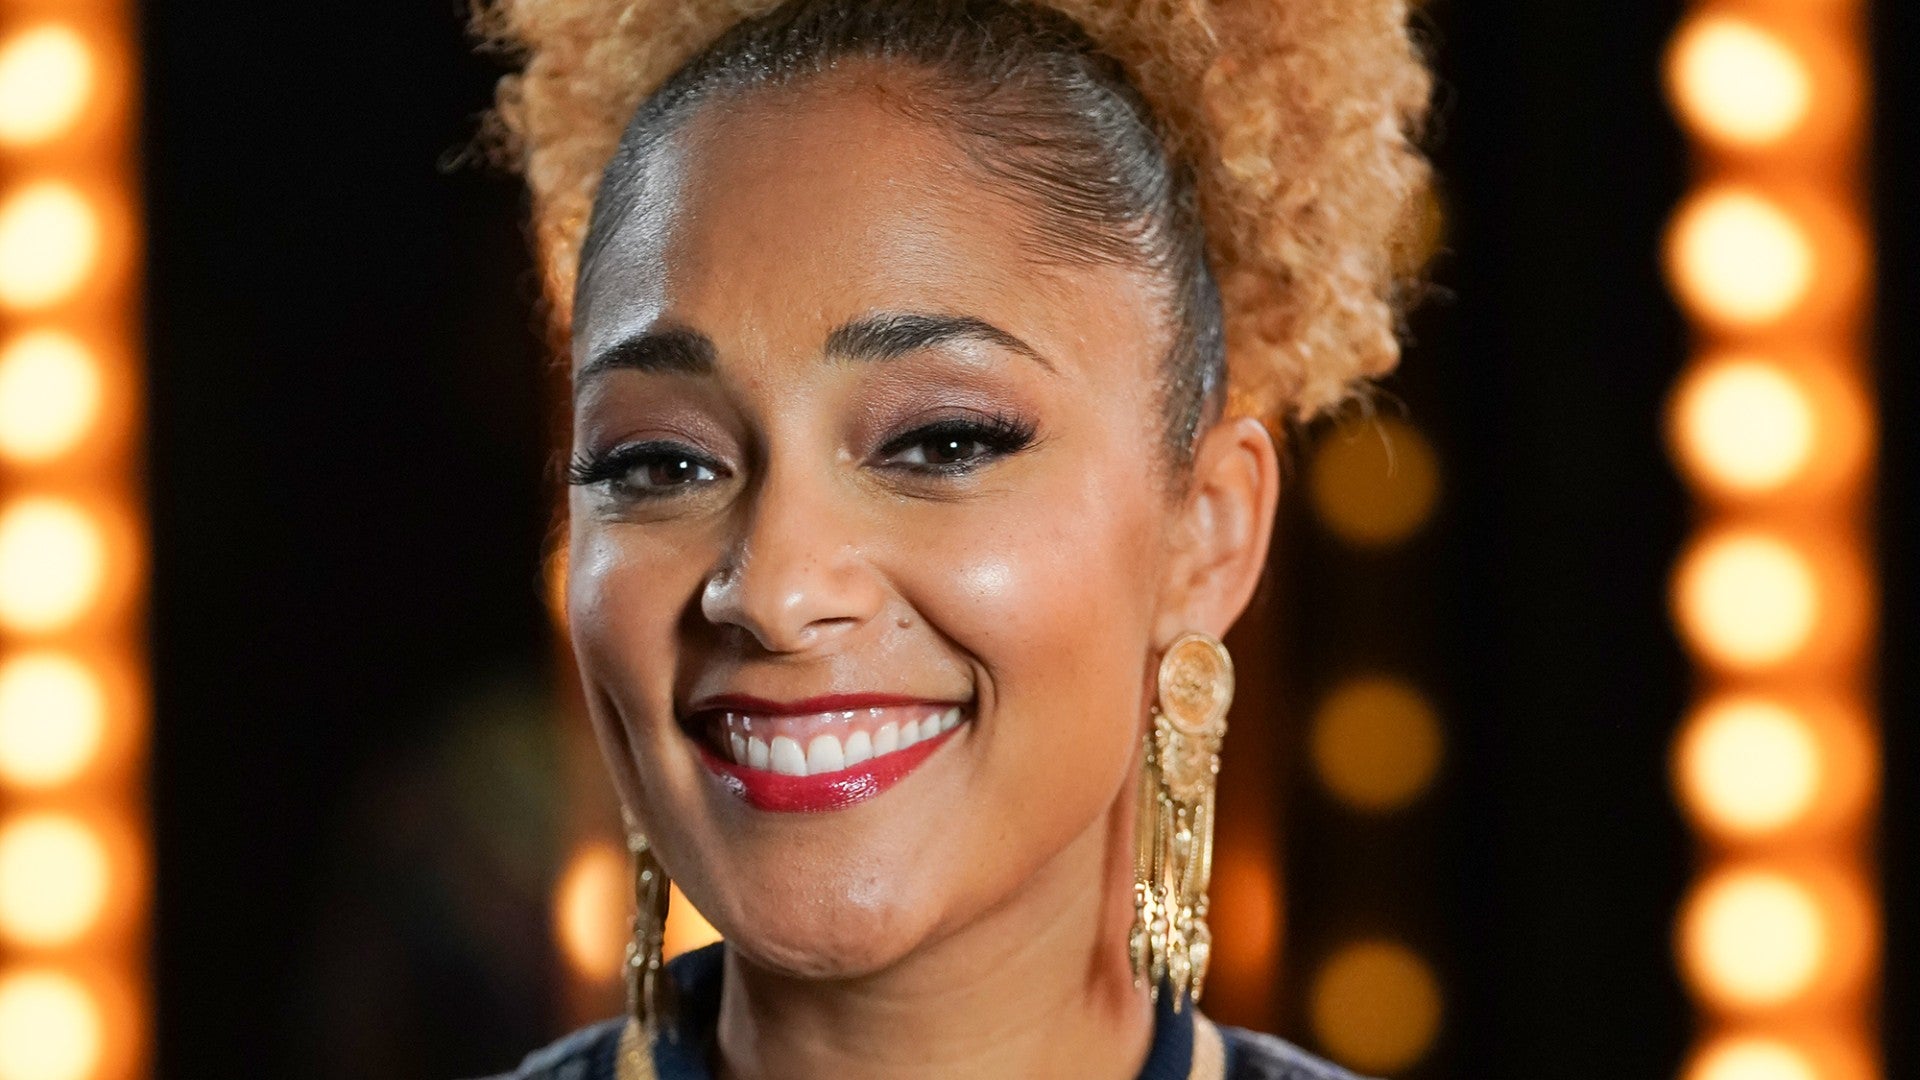 Amanda Seales' Pre-Show Halo Braid Was The Beauty Highlight Of The BET Awards